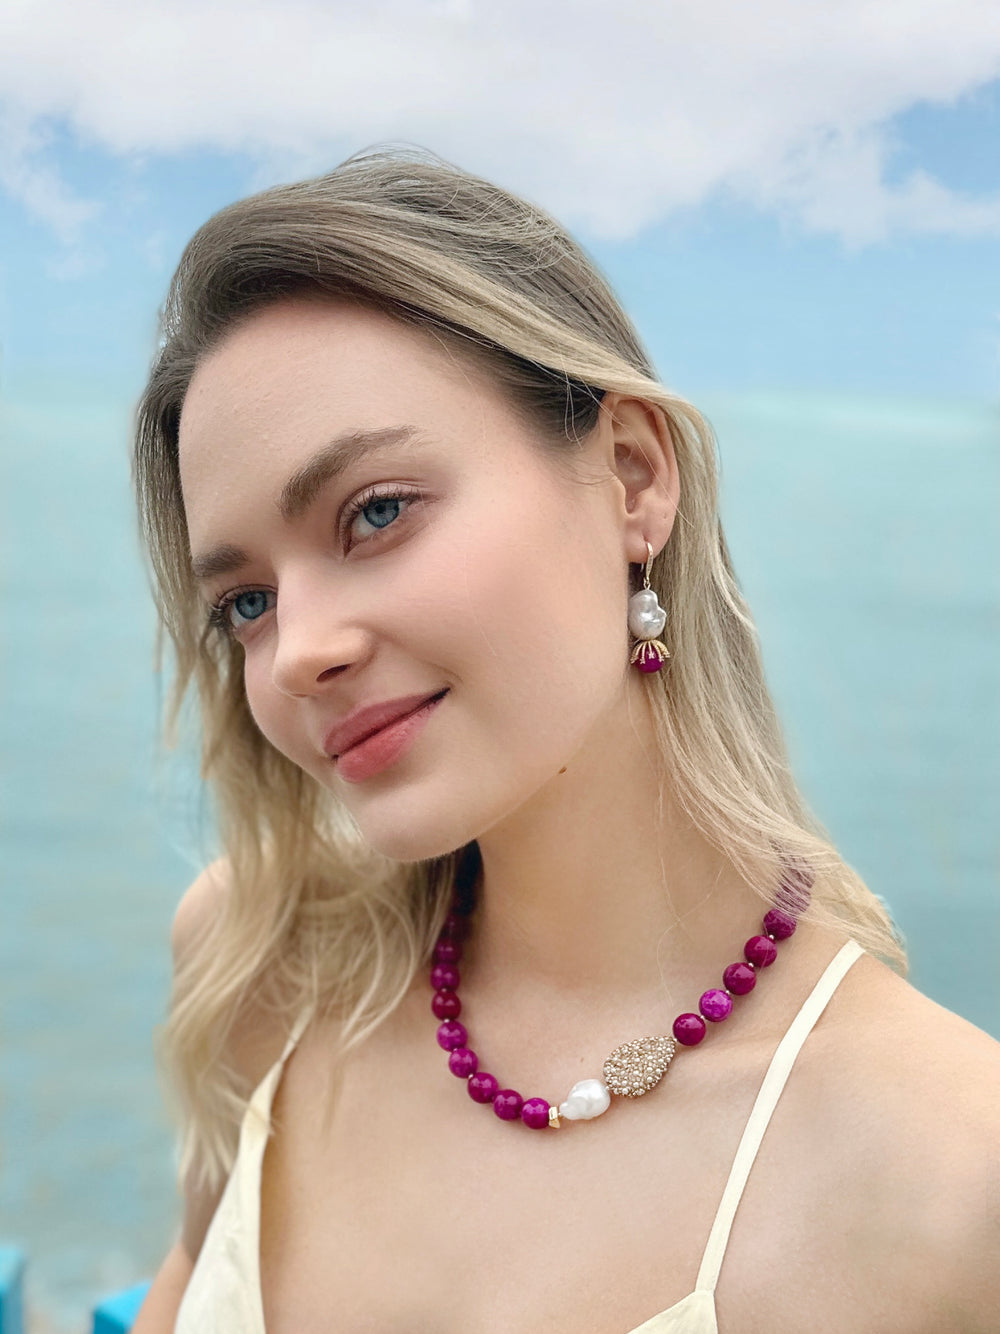 Magenta Gemstone with Baroque Pearl Pendant Statement Necklace LN013 - FARRA